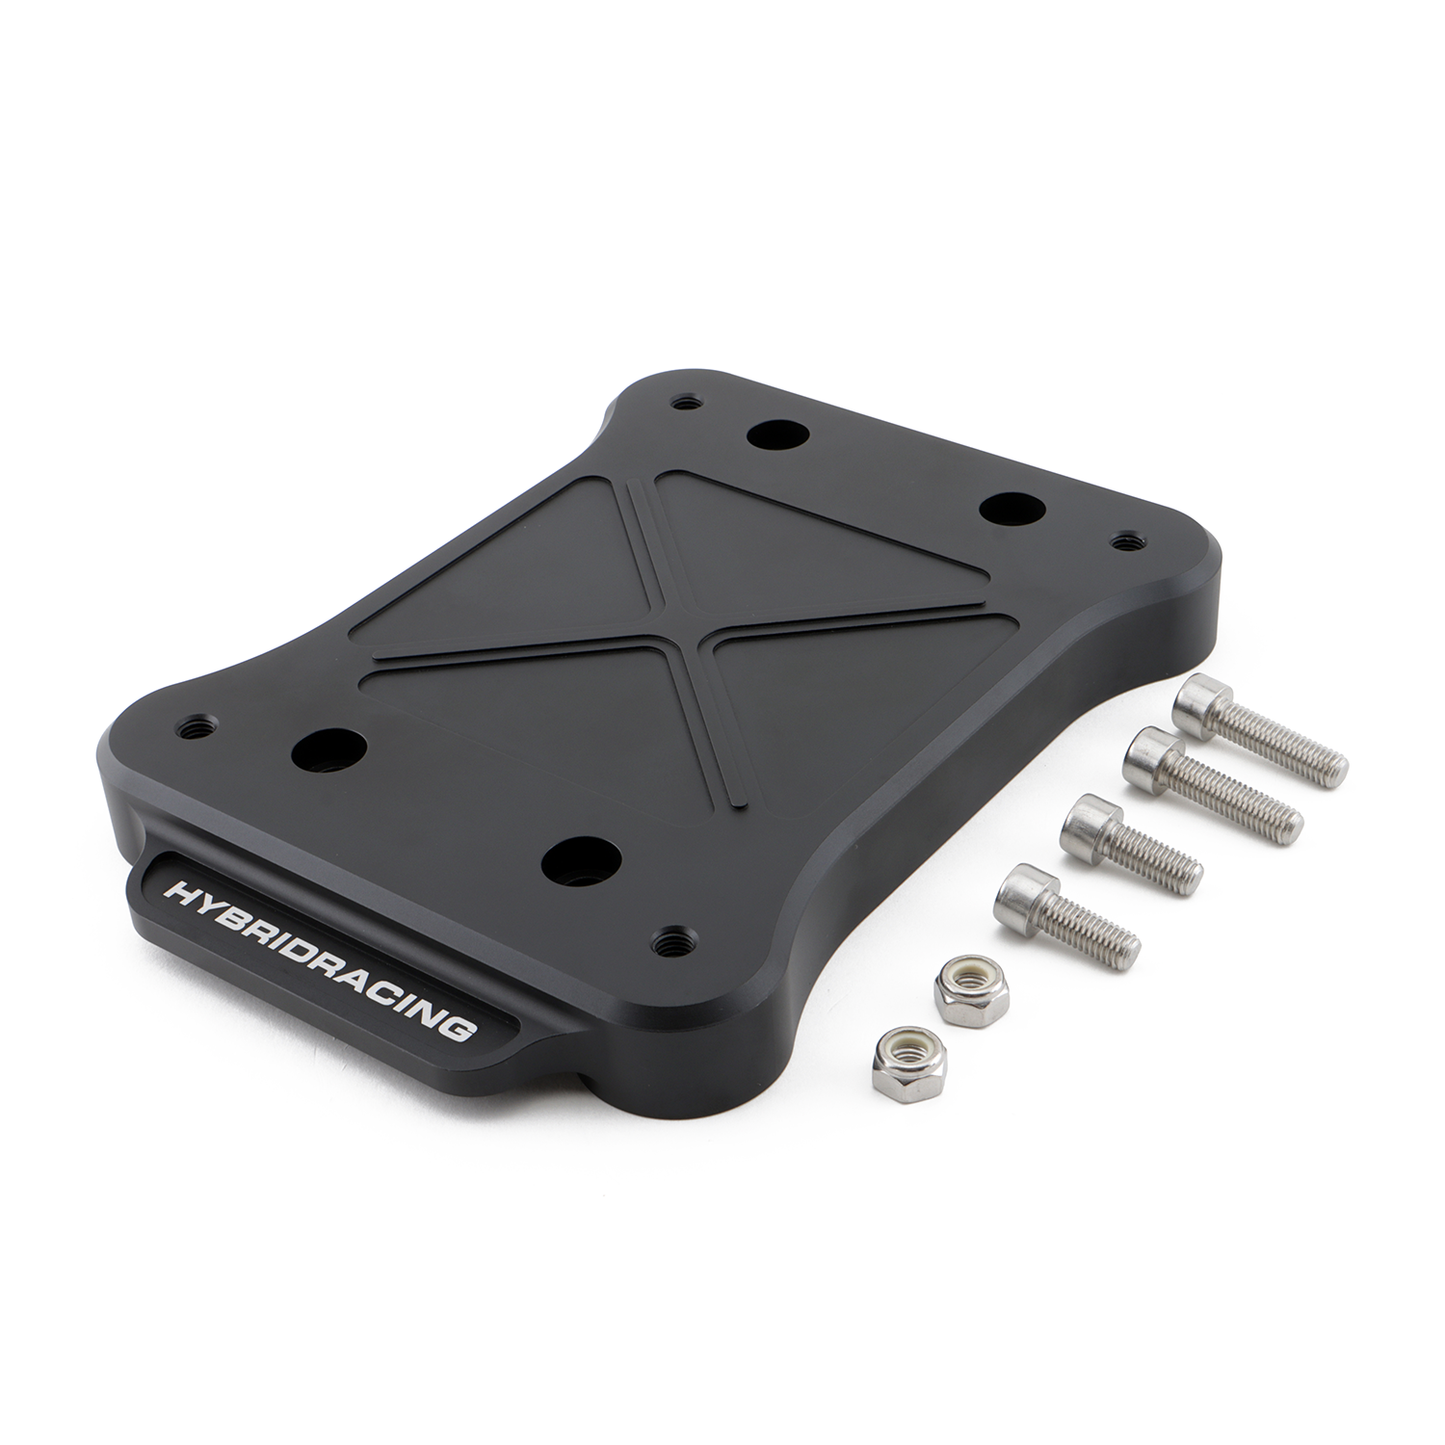 Hybrid Racing TSX Shifter Mounting Plate HYB-SMP-01-10